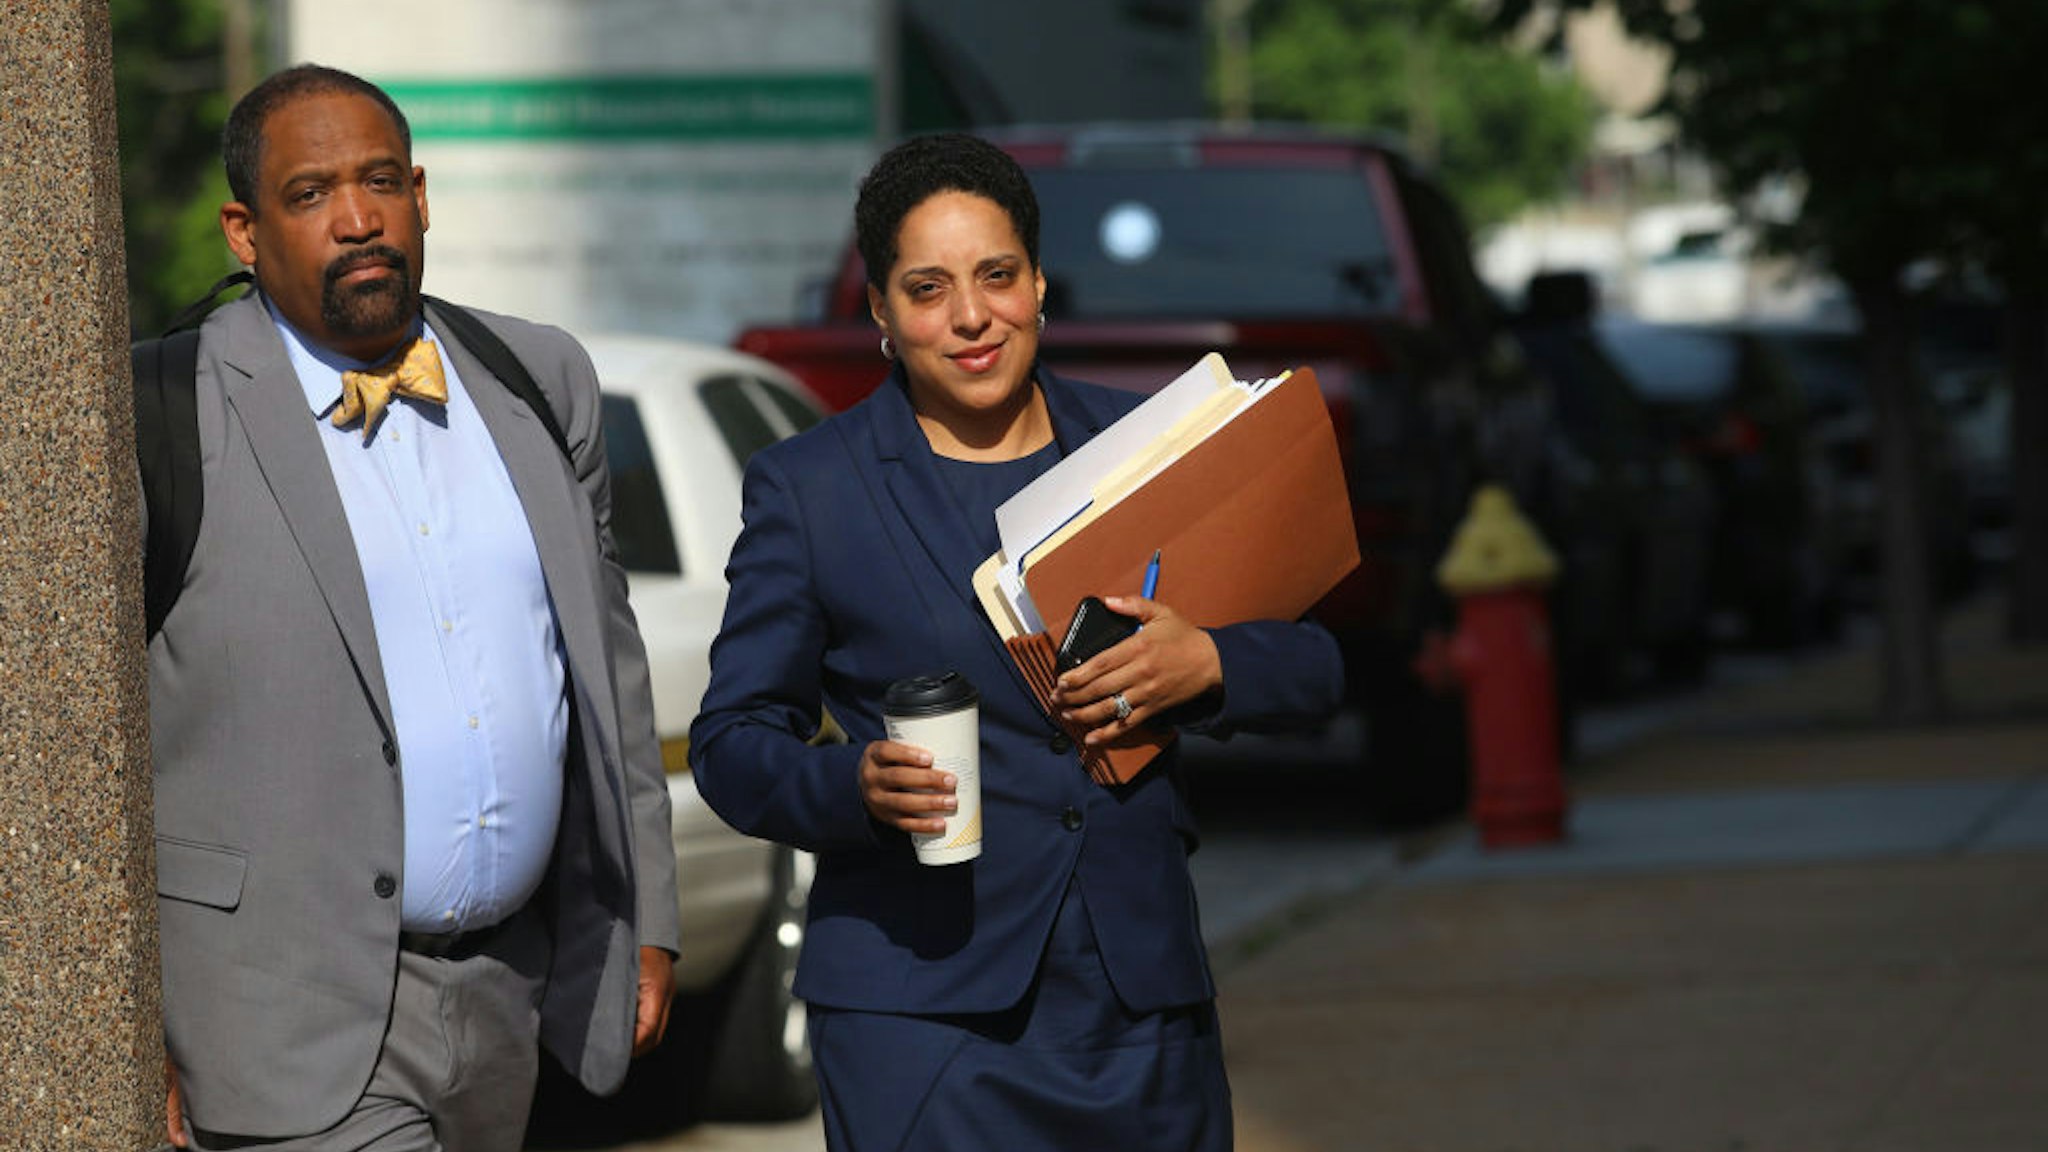 St. Louis Circuit Attorney Kim Gardner, right, and Ronald Sullivan, a Harvard law professor, arrive at the Civil Courts building on May 14, 2018. (Christian Gooden/St. Louis Post-Dispatch/Tribune News Service via Getty Images)